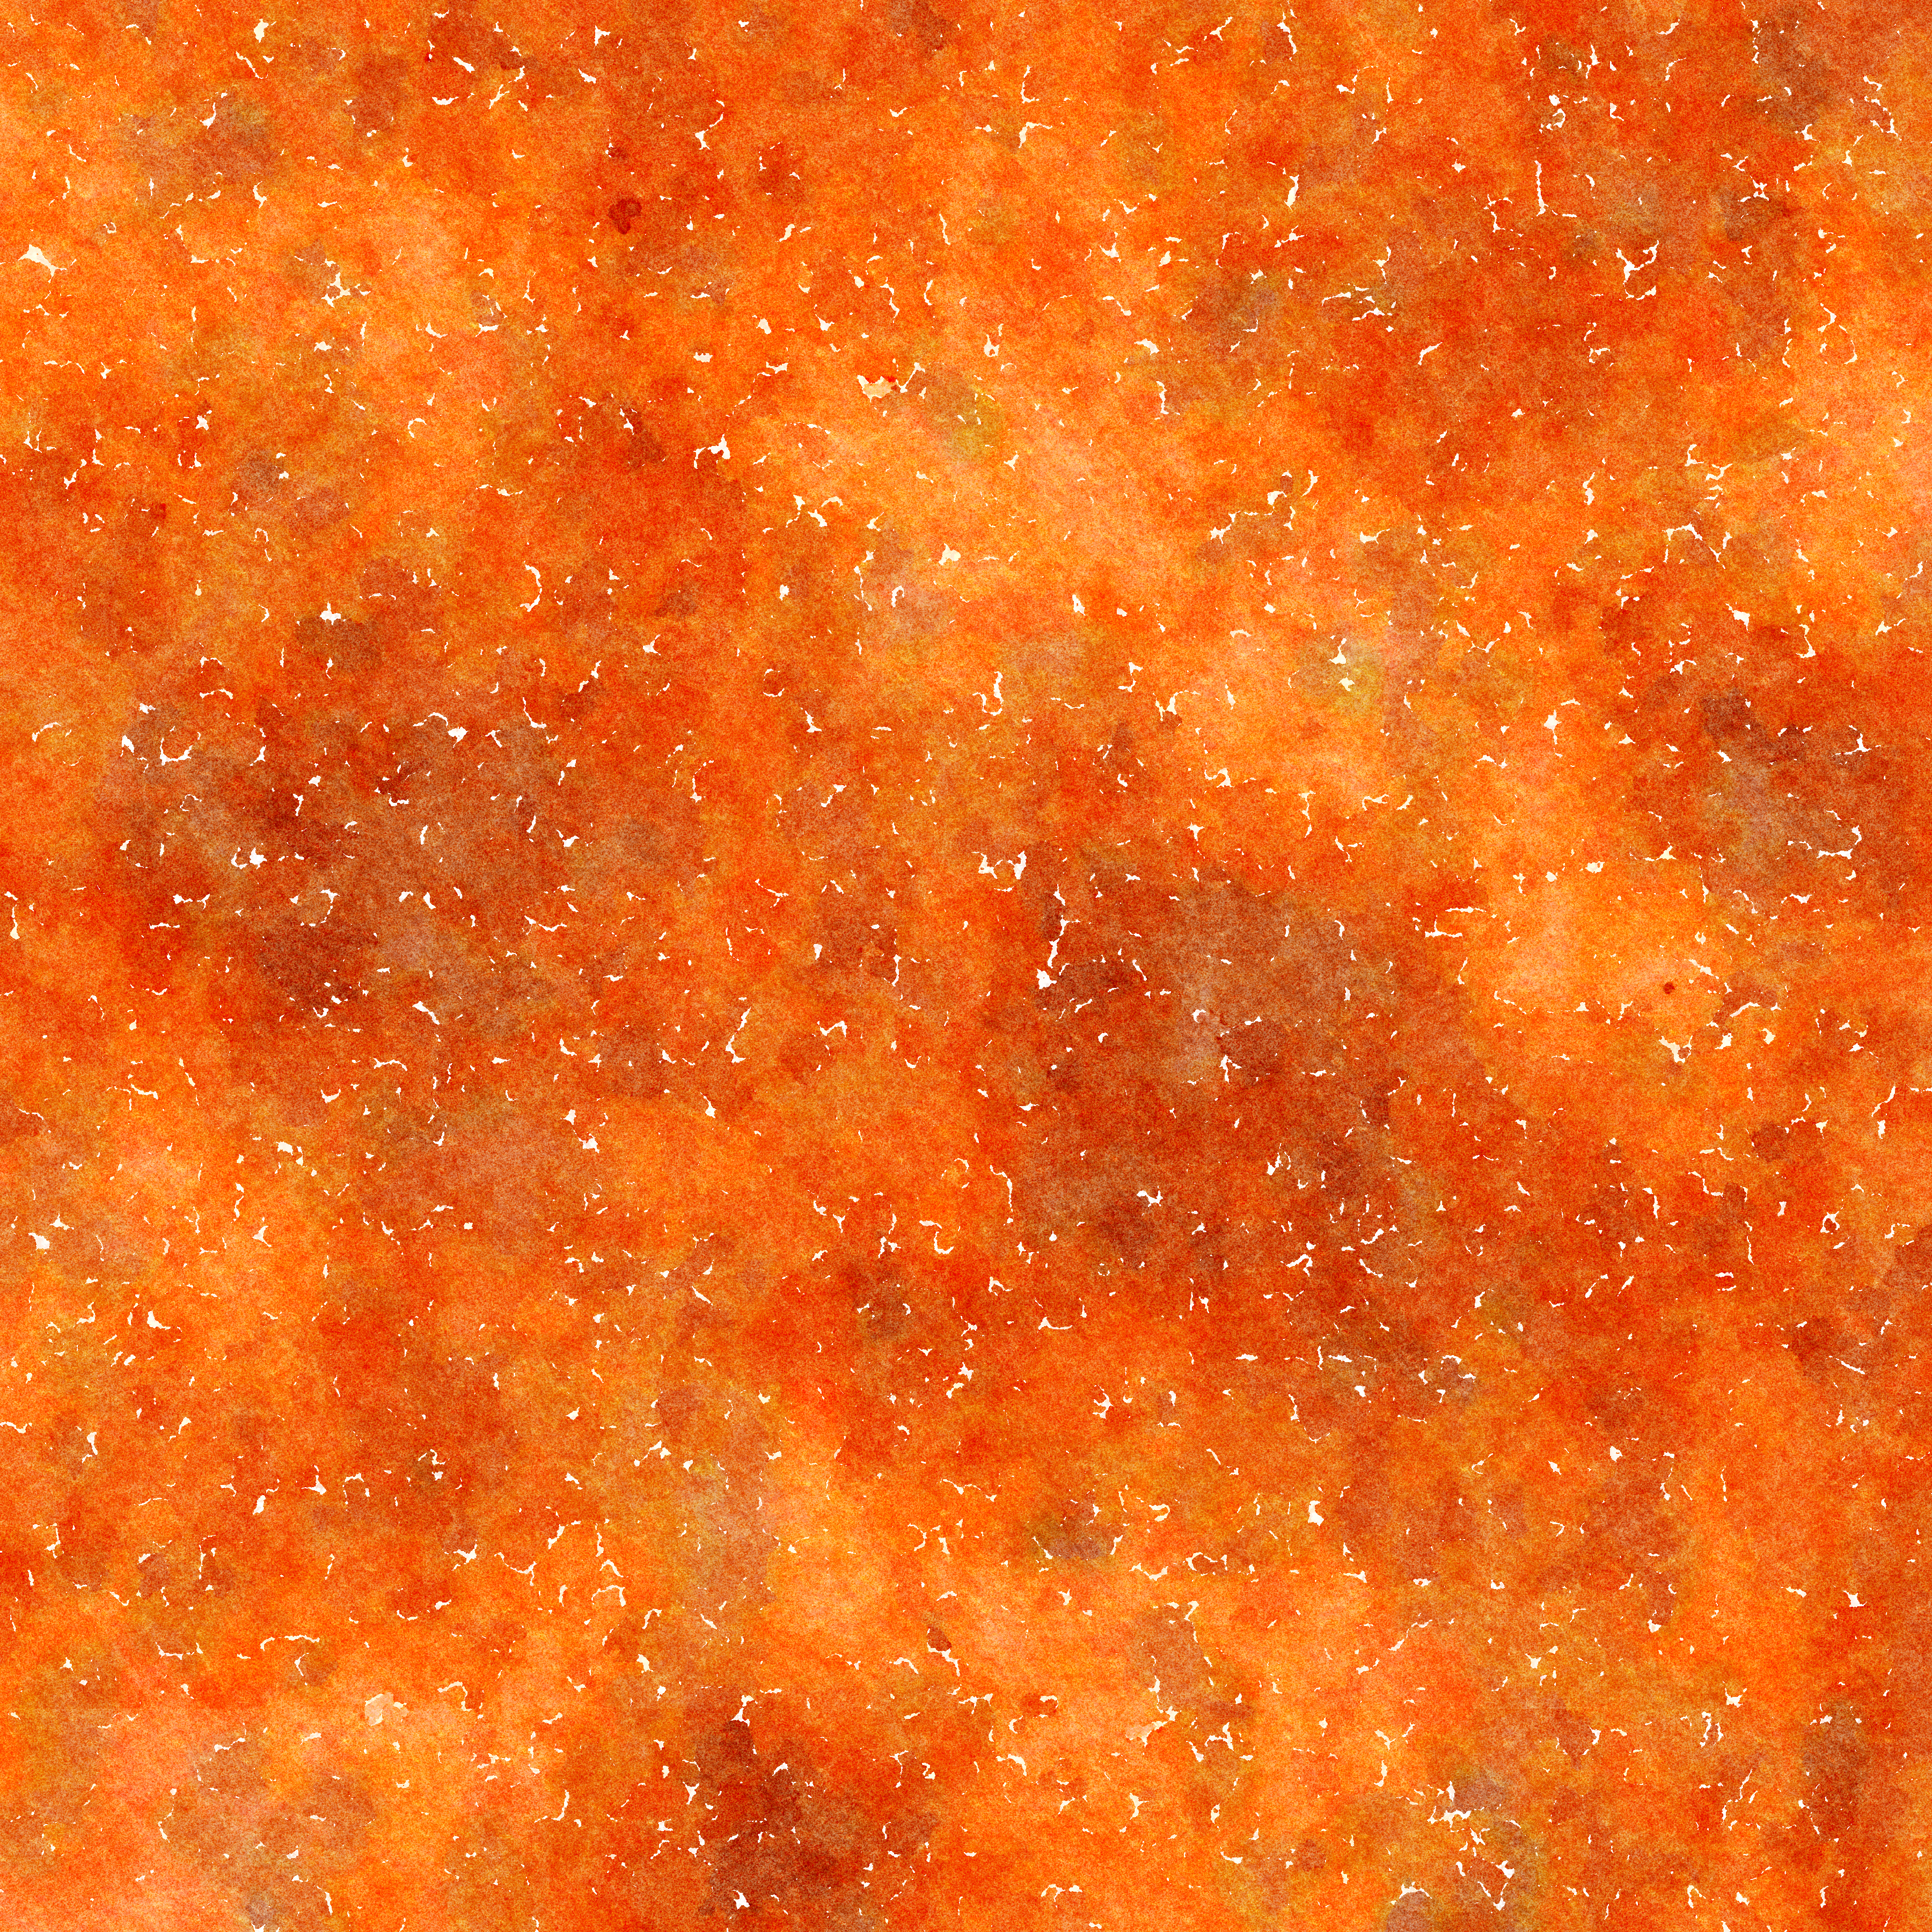 orange, watercolor, textures, texture cell phone wallpapers